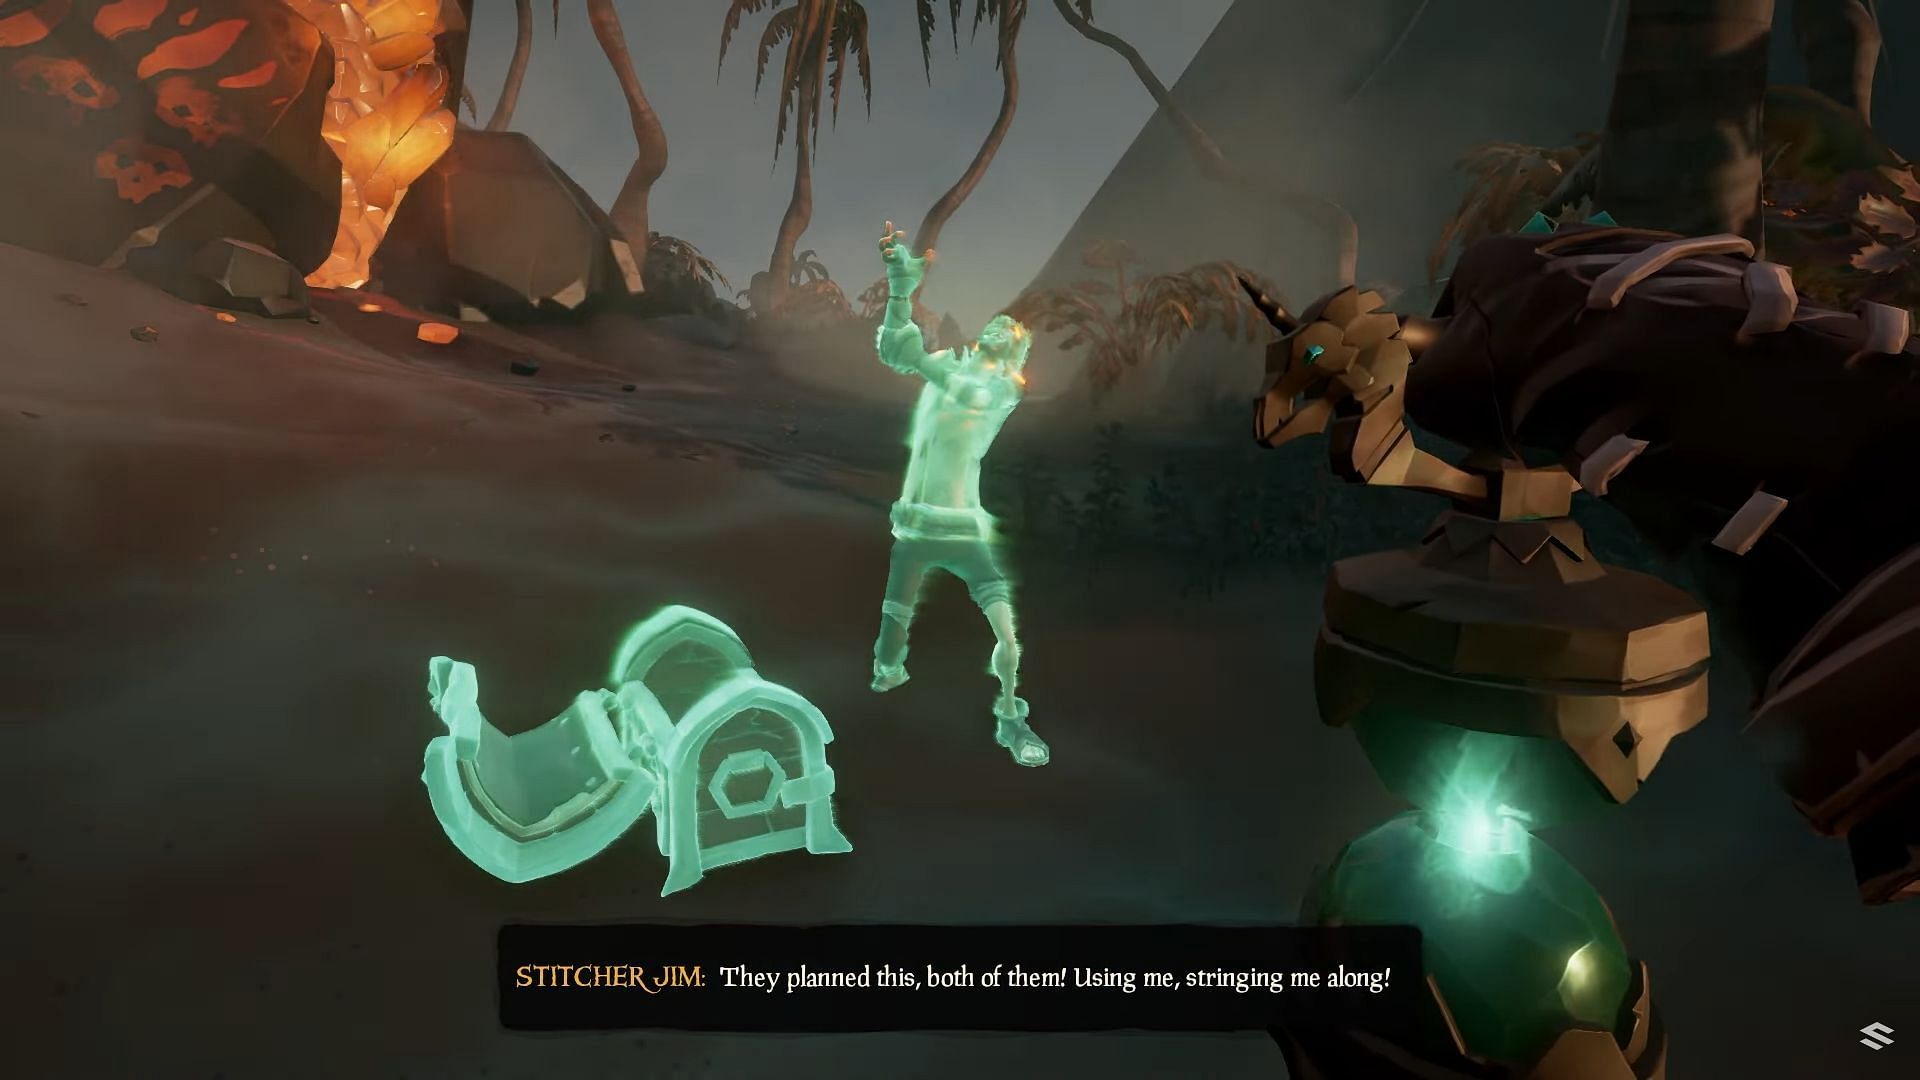 That hand is not going to be healing anytime soon (Image via YouTube/Syrekx)